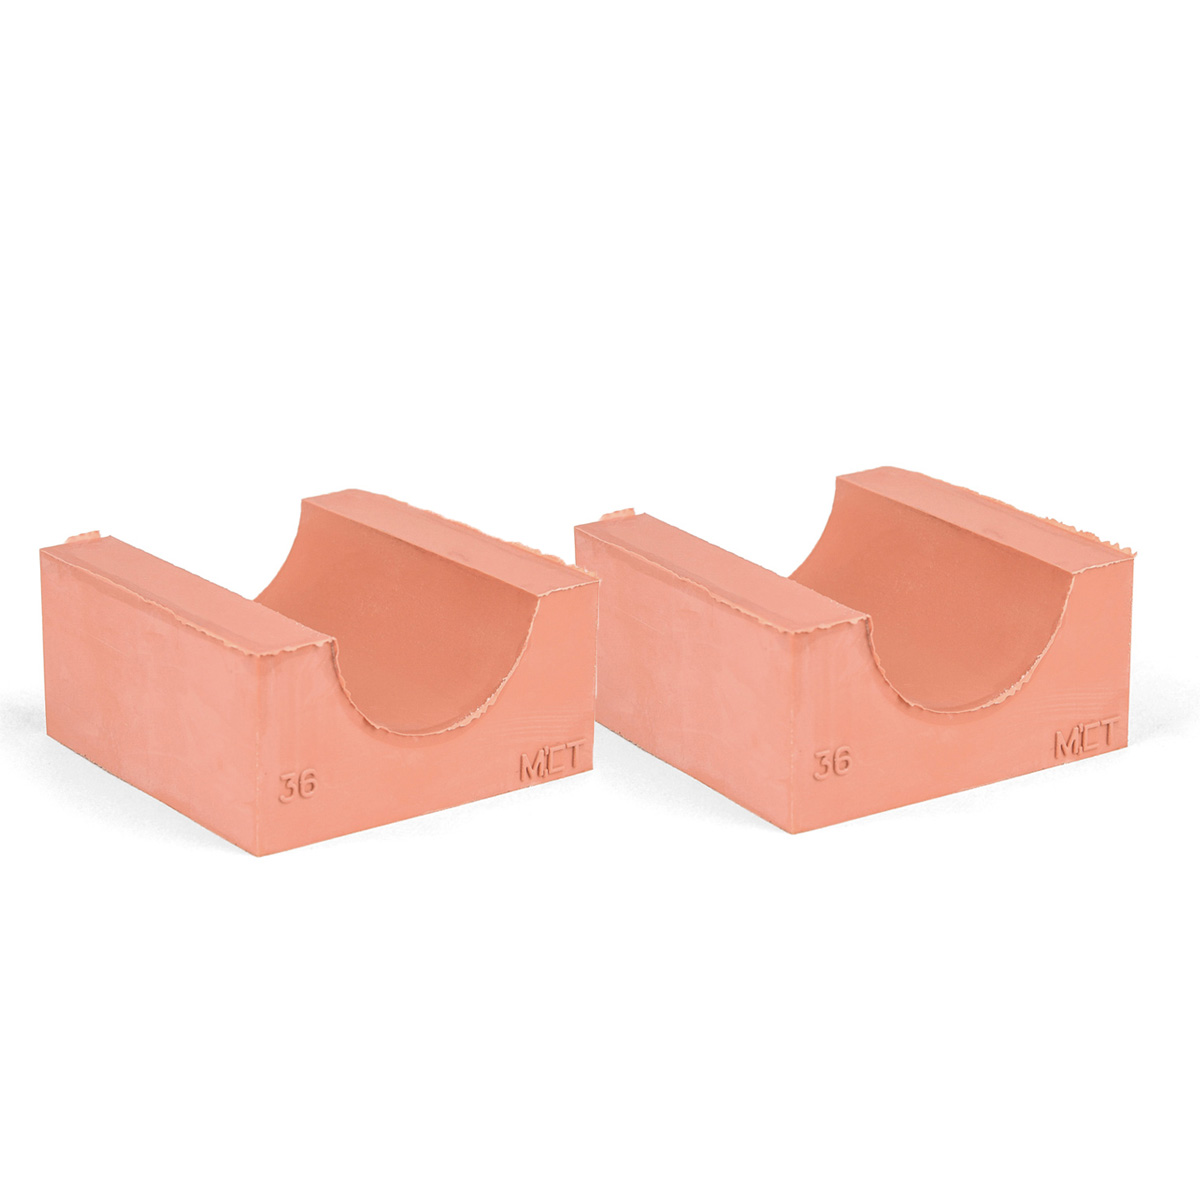 60-36*2 Set of 2 half insert block lycron, 60-36 for cable/pipe diam. 35.5-37.5mm